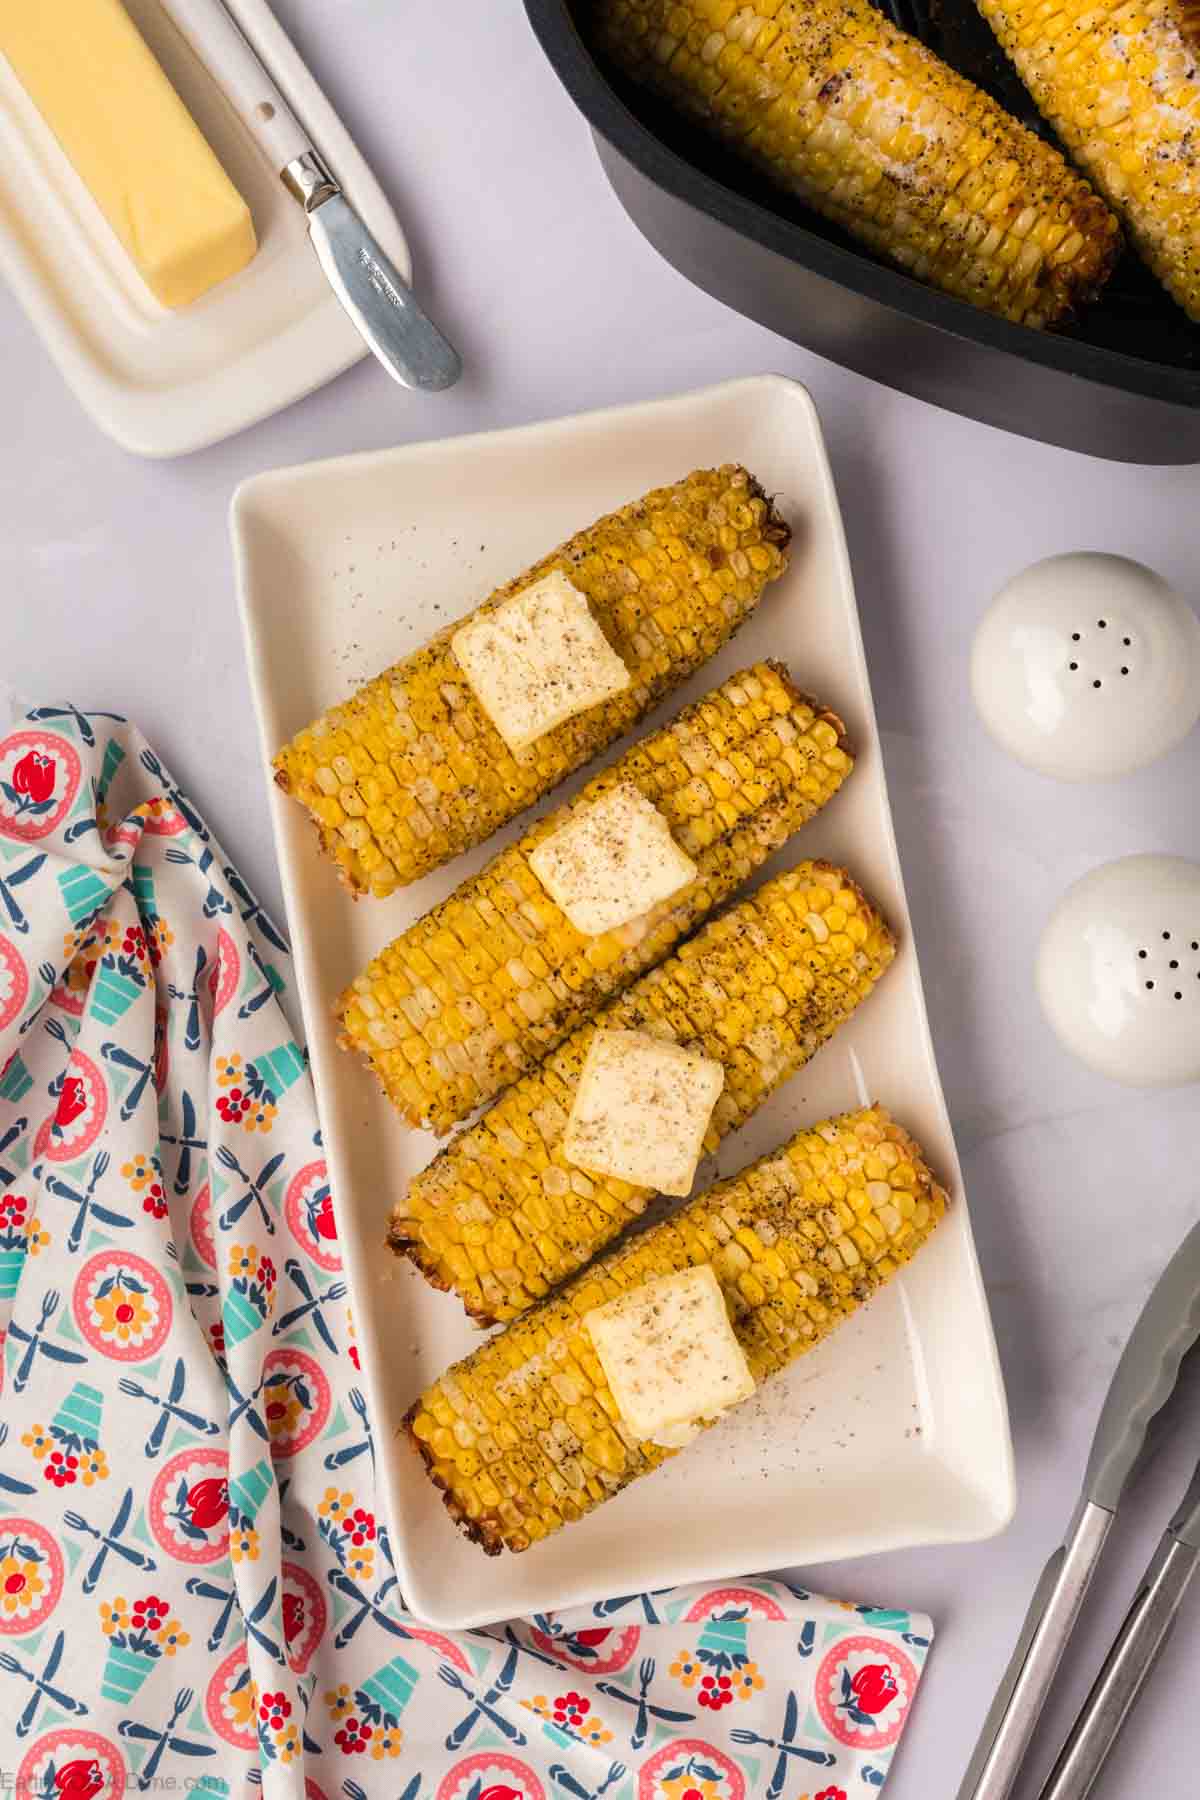 Four grilled corn on the cobs with butter pats and a sprinkle of seasoning are arranged on a white rectangular plate. A colorful patterned napkin, salt and pepper shakers, tongs, a butter dish with a knife, and additional air fryer corn on the cob in a black container are nearby.